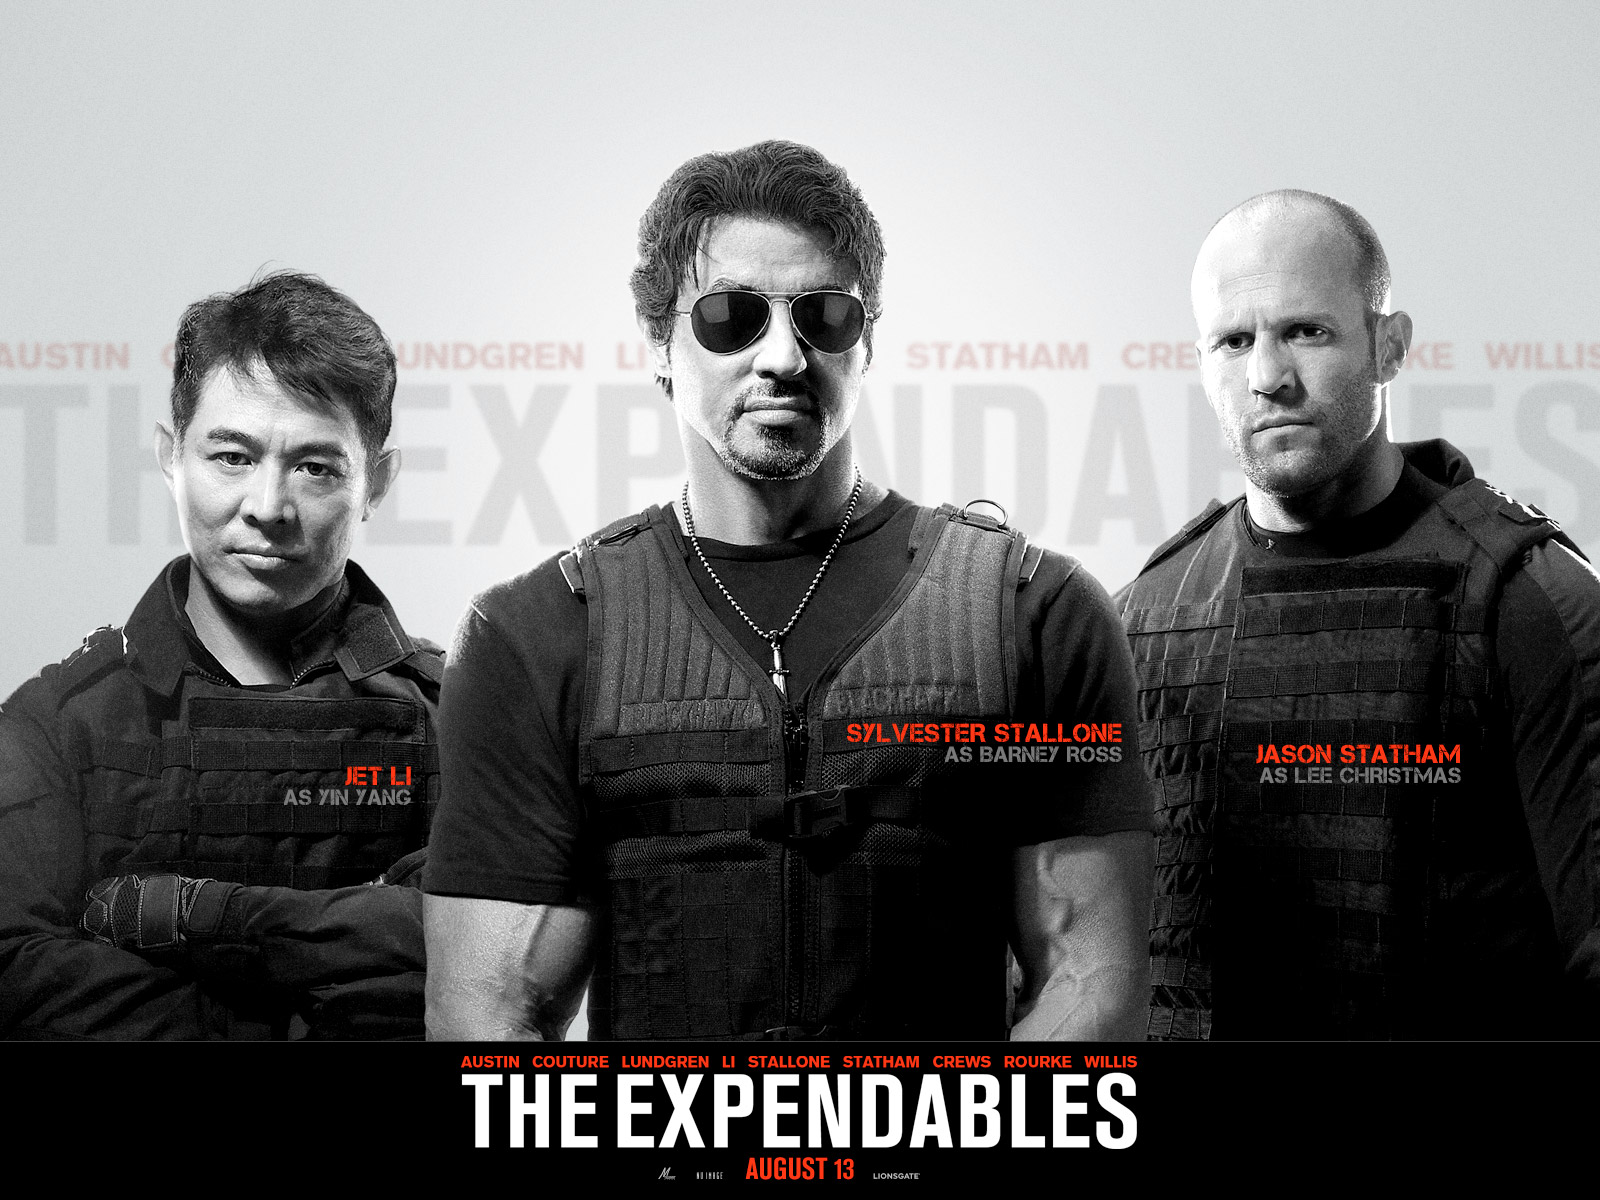 Download full size Jet Le & Sylvester Stallone & Jason Statham The Expendables wallpaper / 1600x1200